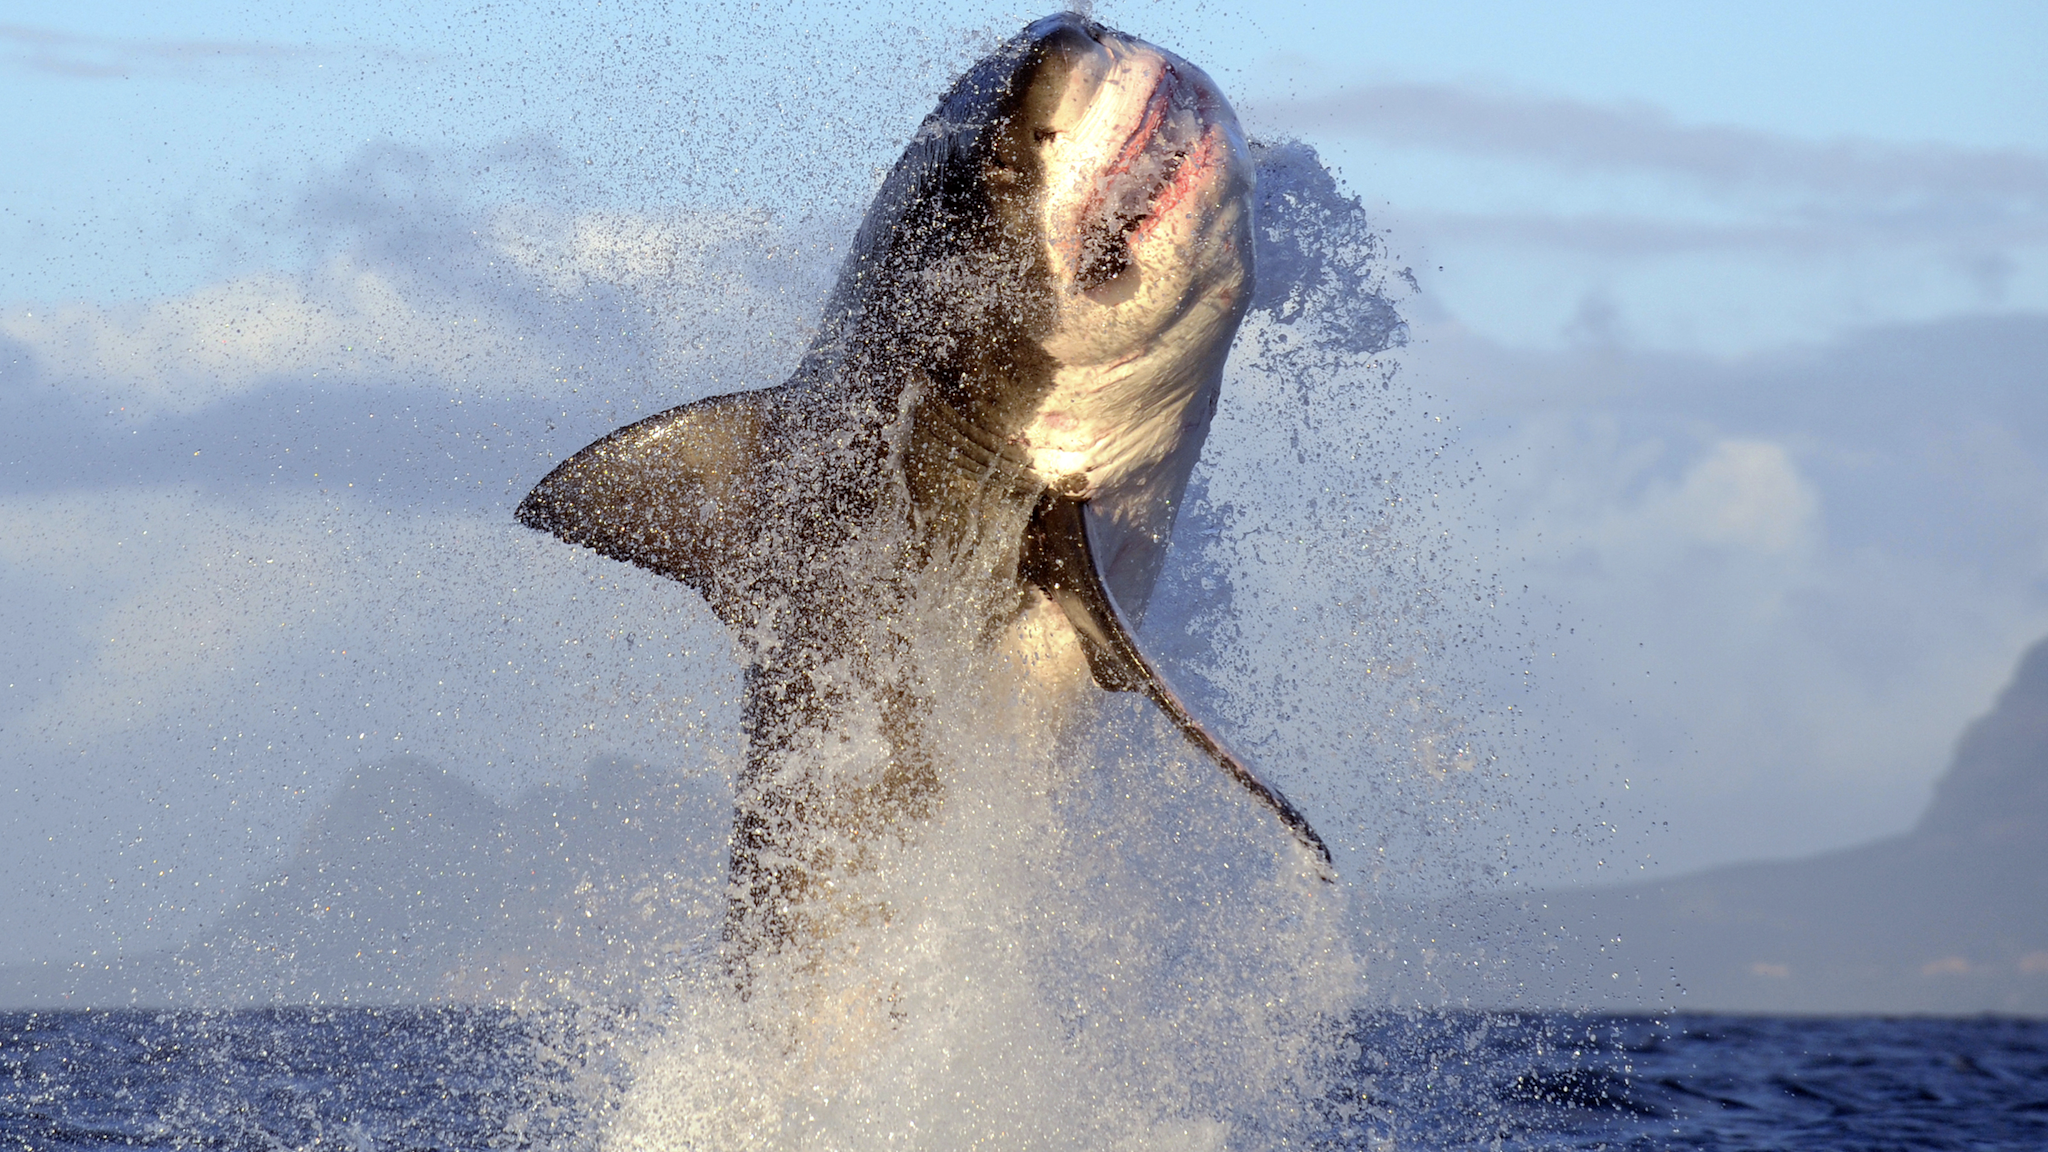 Great White Shark breaching at Seal Island, False Bay, South Africa